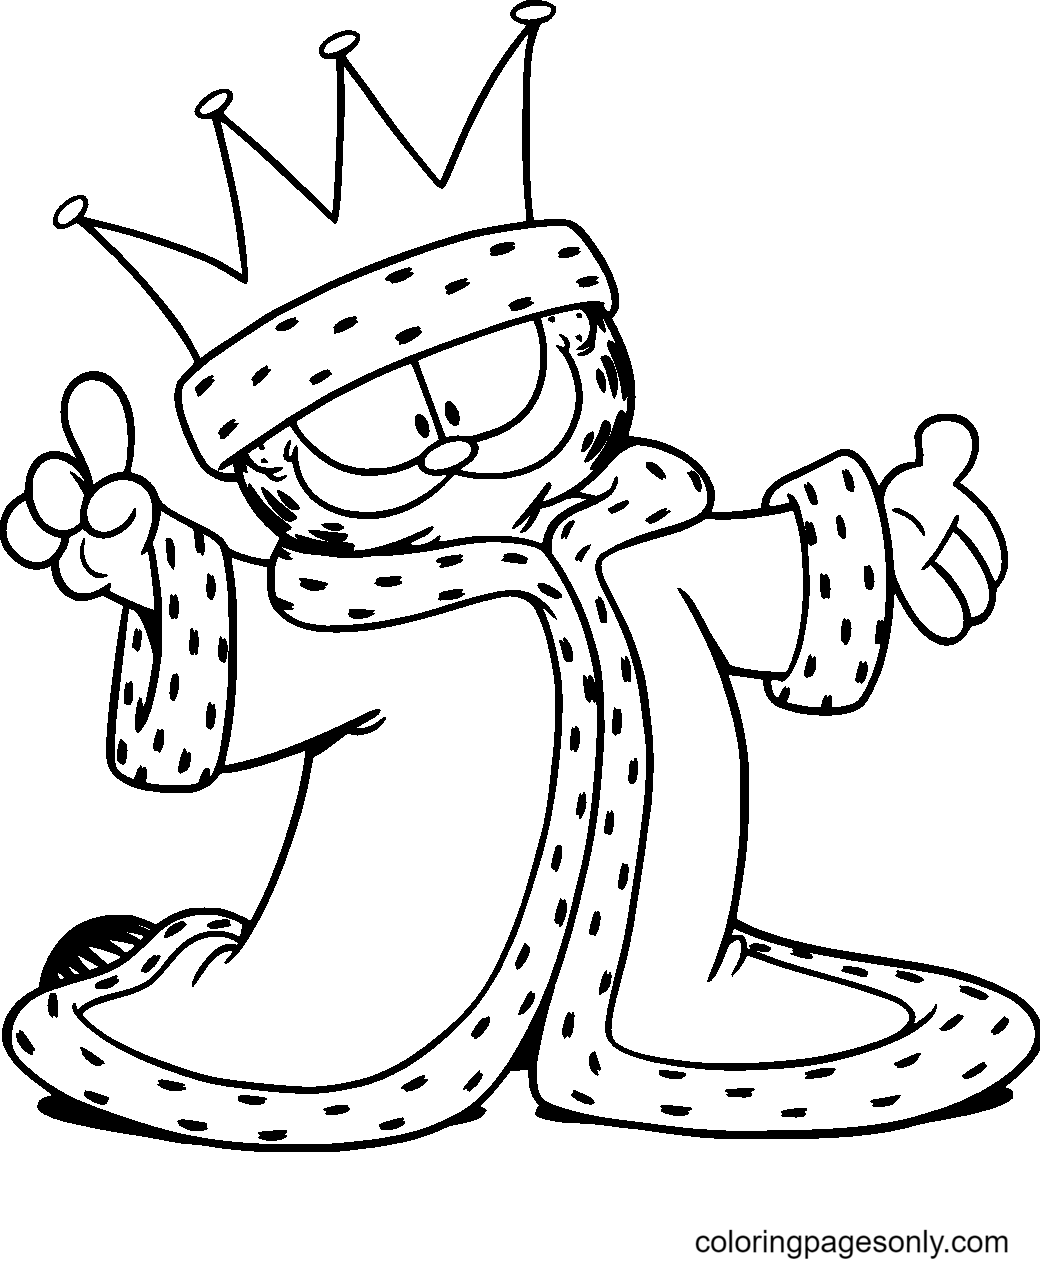 King Garfield Coloring Page